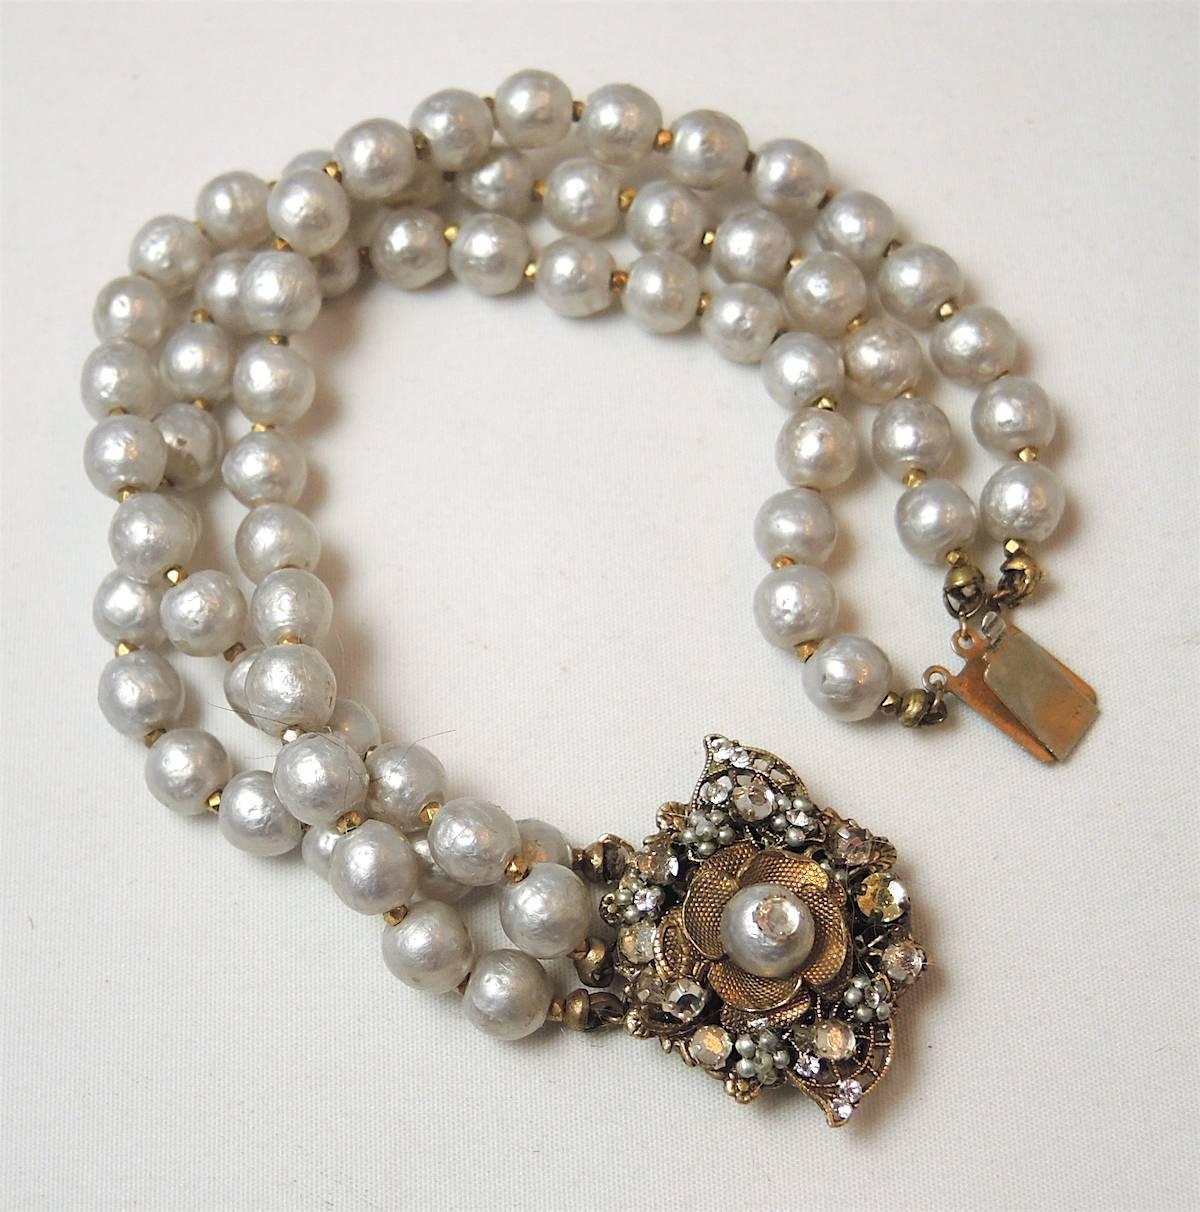 This is a beautiful, classic Miriam Haskell bracelet featuring 3 luscious strands of the famous Haskell faux pearls with faceted crystal accents in a gold-tone setting.  This bracelet measures 7” long with a 1” centerpiece/closure; each faux pearl